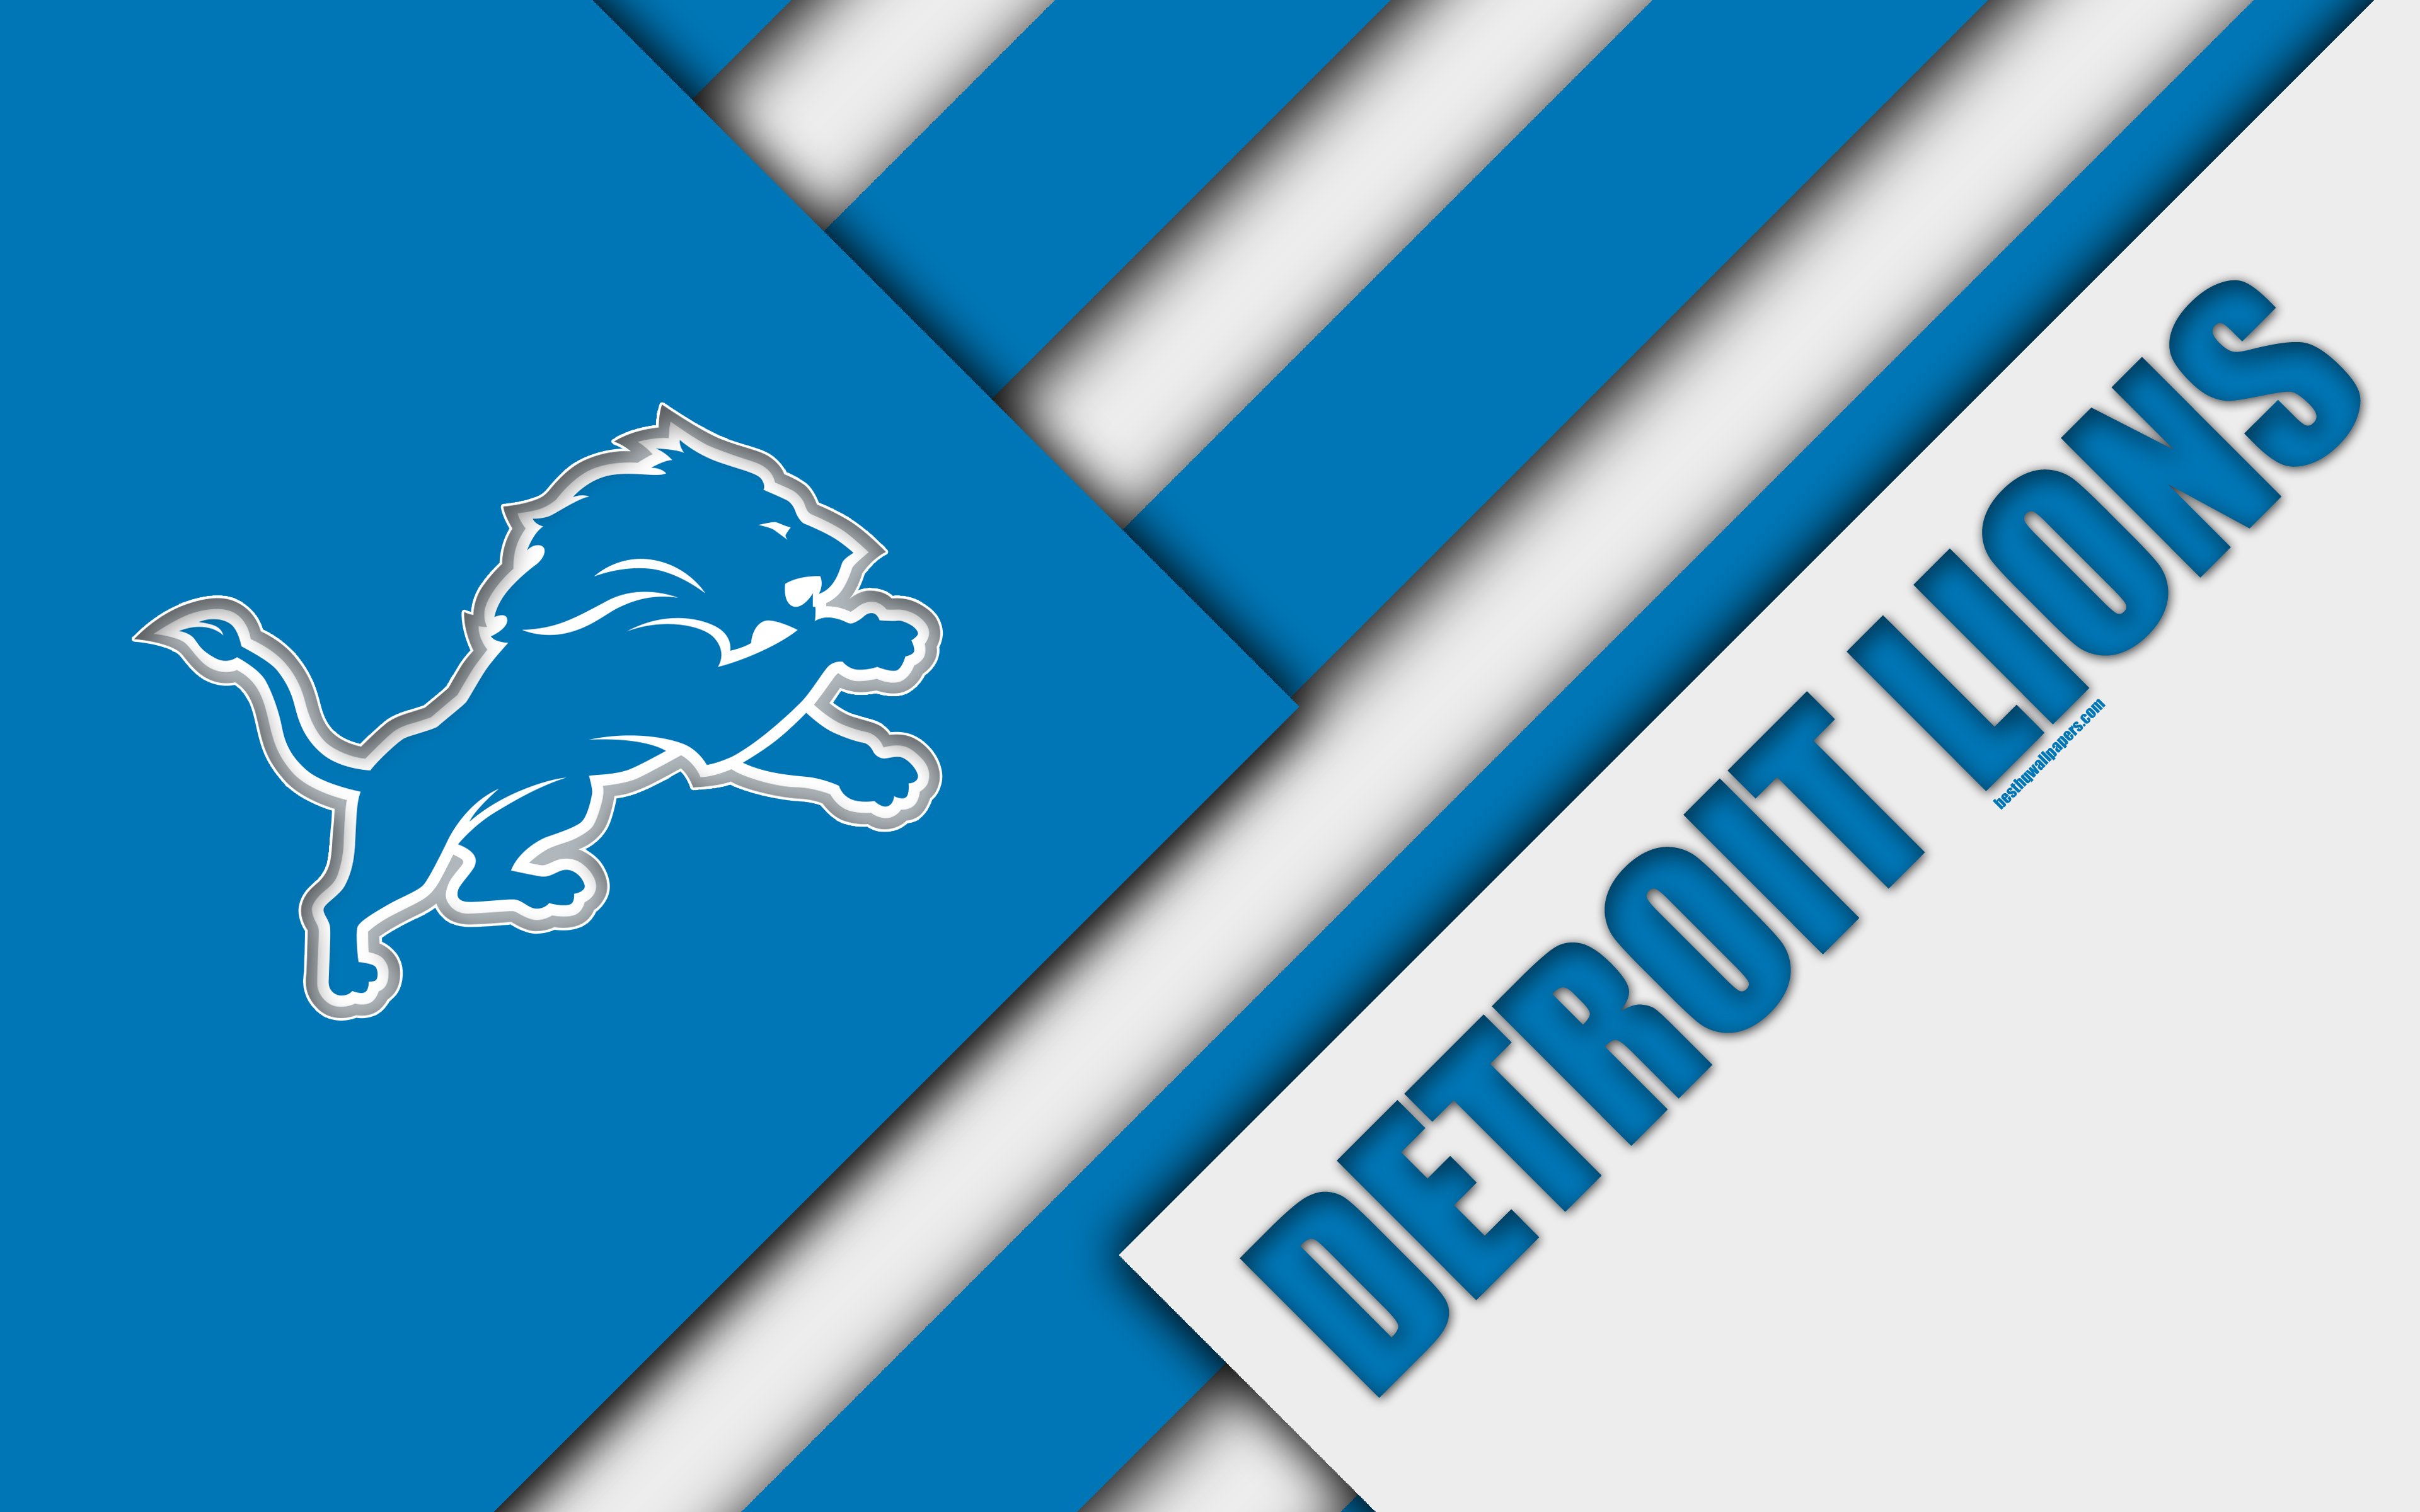 Download wallpaper Detroit Lions, 4k, logo, NFL, blue white abstraction, material design, American football, Detroit, Michigan, USA, National Football League, NFC North for desktop with resolution 3840x2400. High Quality HD picture wallpaper